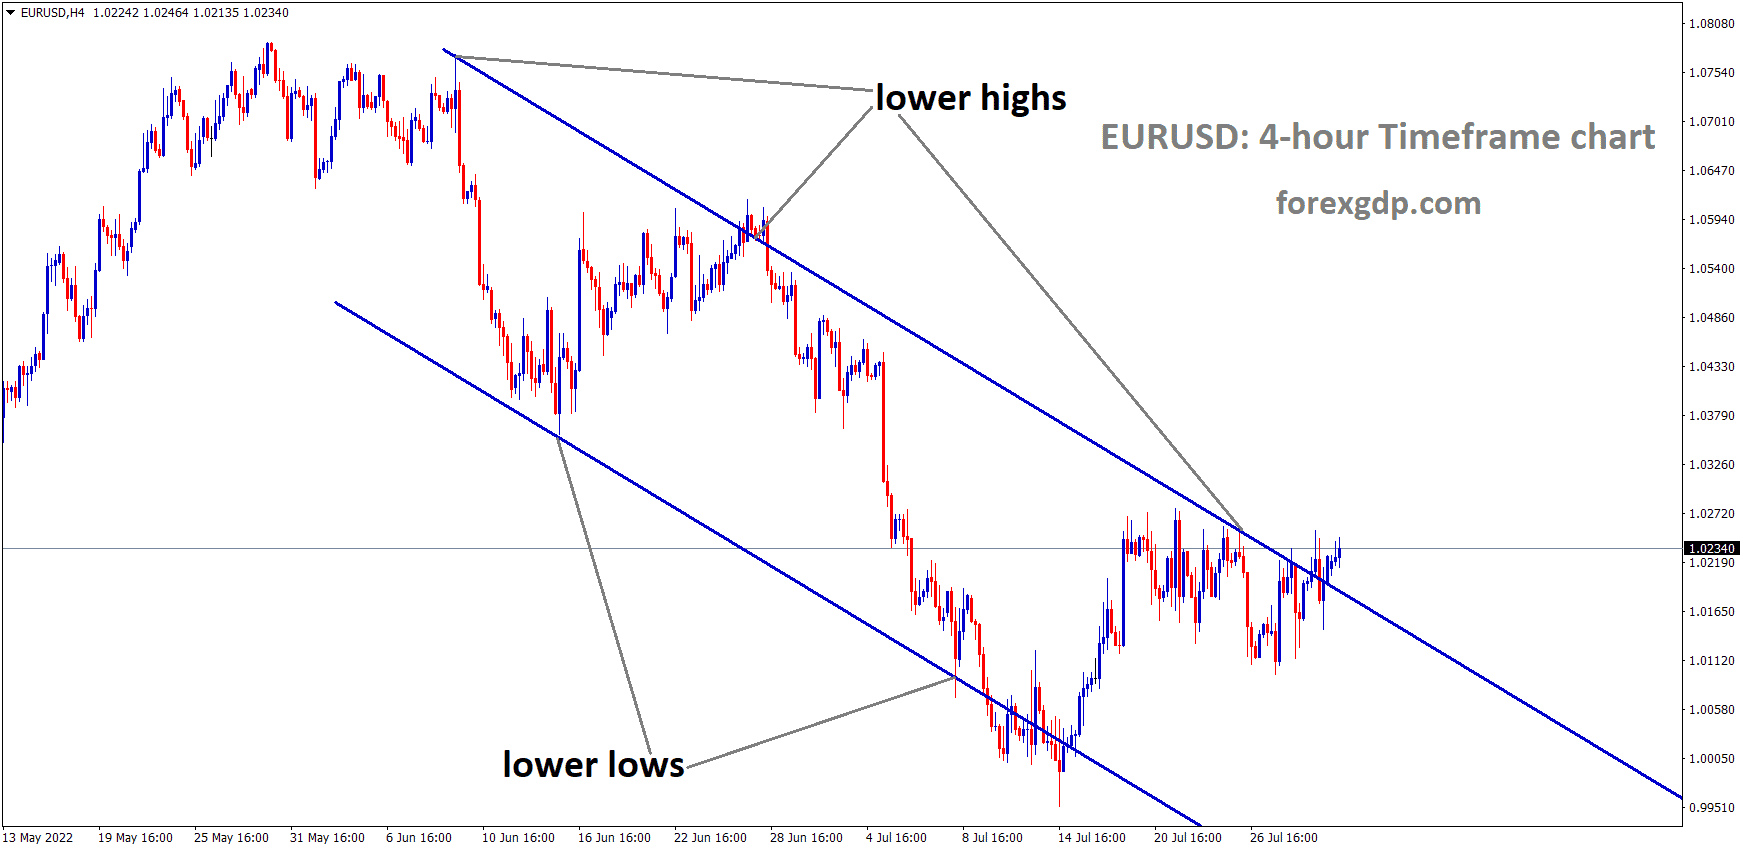 EURUSD H4 TF analysis Market is moving in the Descending channel and the Market has reached the Lower high area of the channel